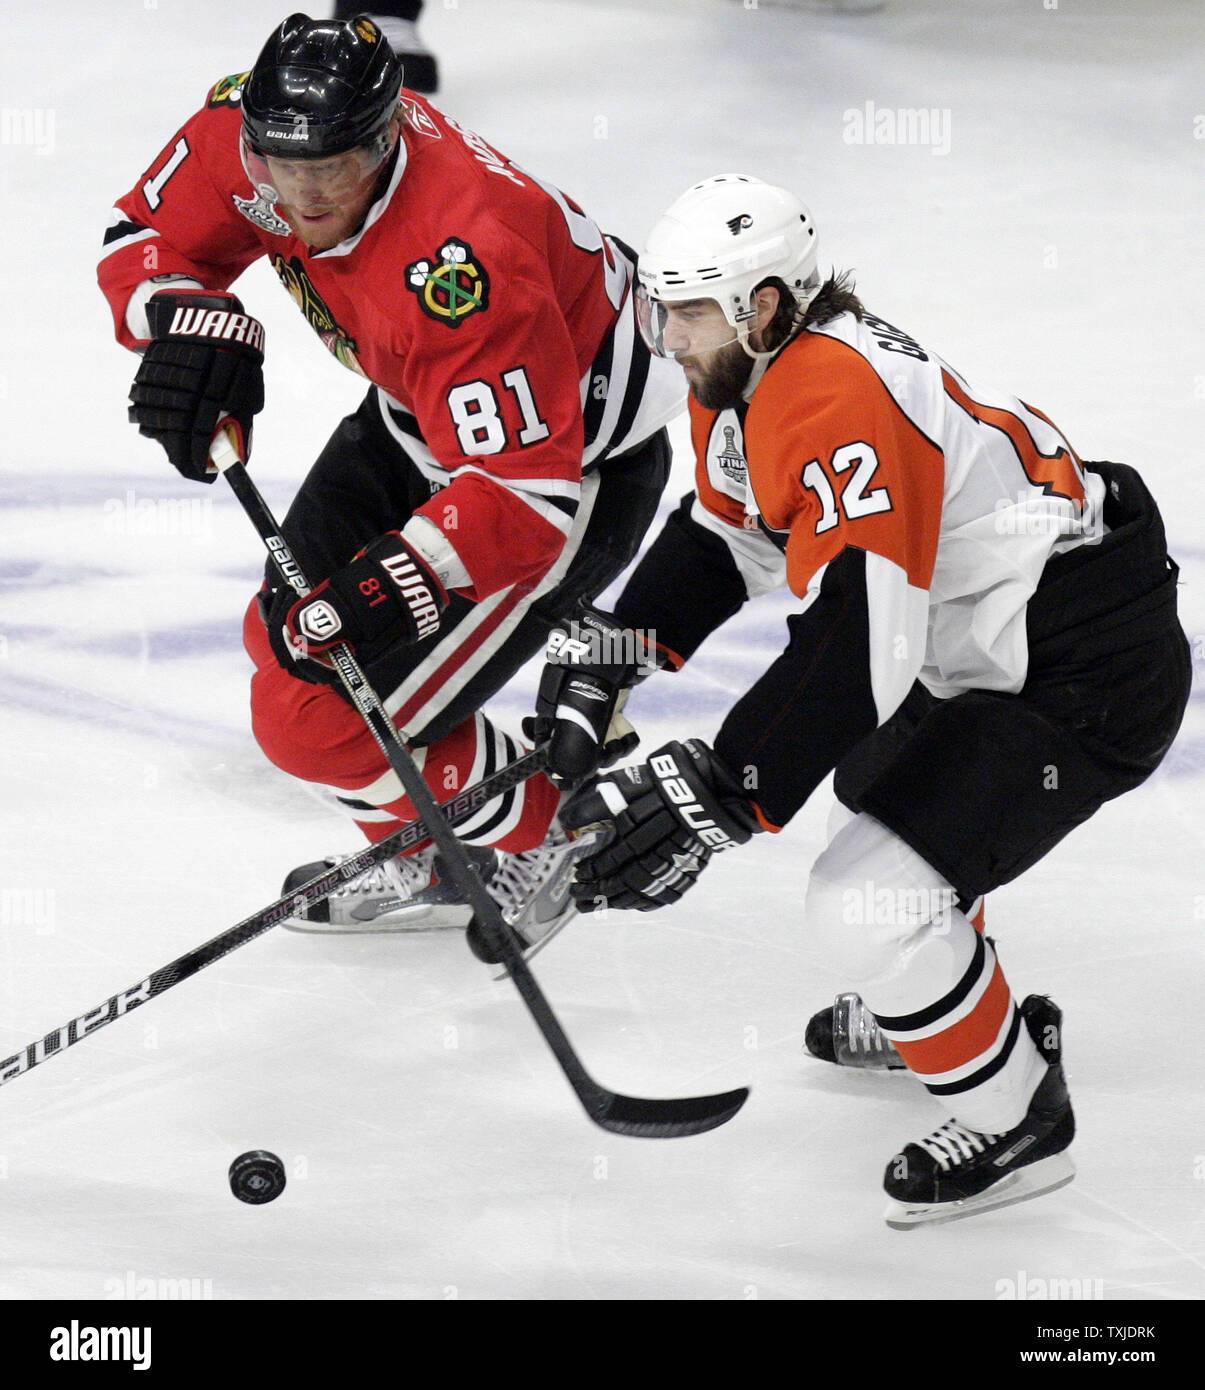 Philadelphia Flyers left wing Simon Gagne (12) and Chicago Blackhawks right wing Marian Hossa (81) battle for a loose puck during the first period of game 5 of the 2010 Stanley Cup Final at the United Center in Chicago, June 6, 2010. (UPI Photo/Mark Cowan) Stock Photo